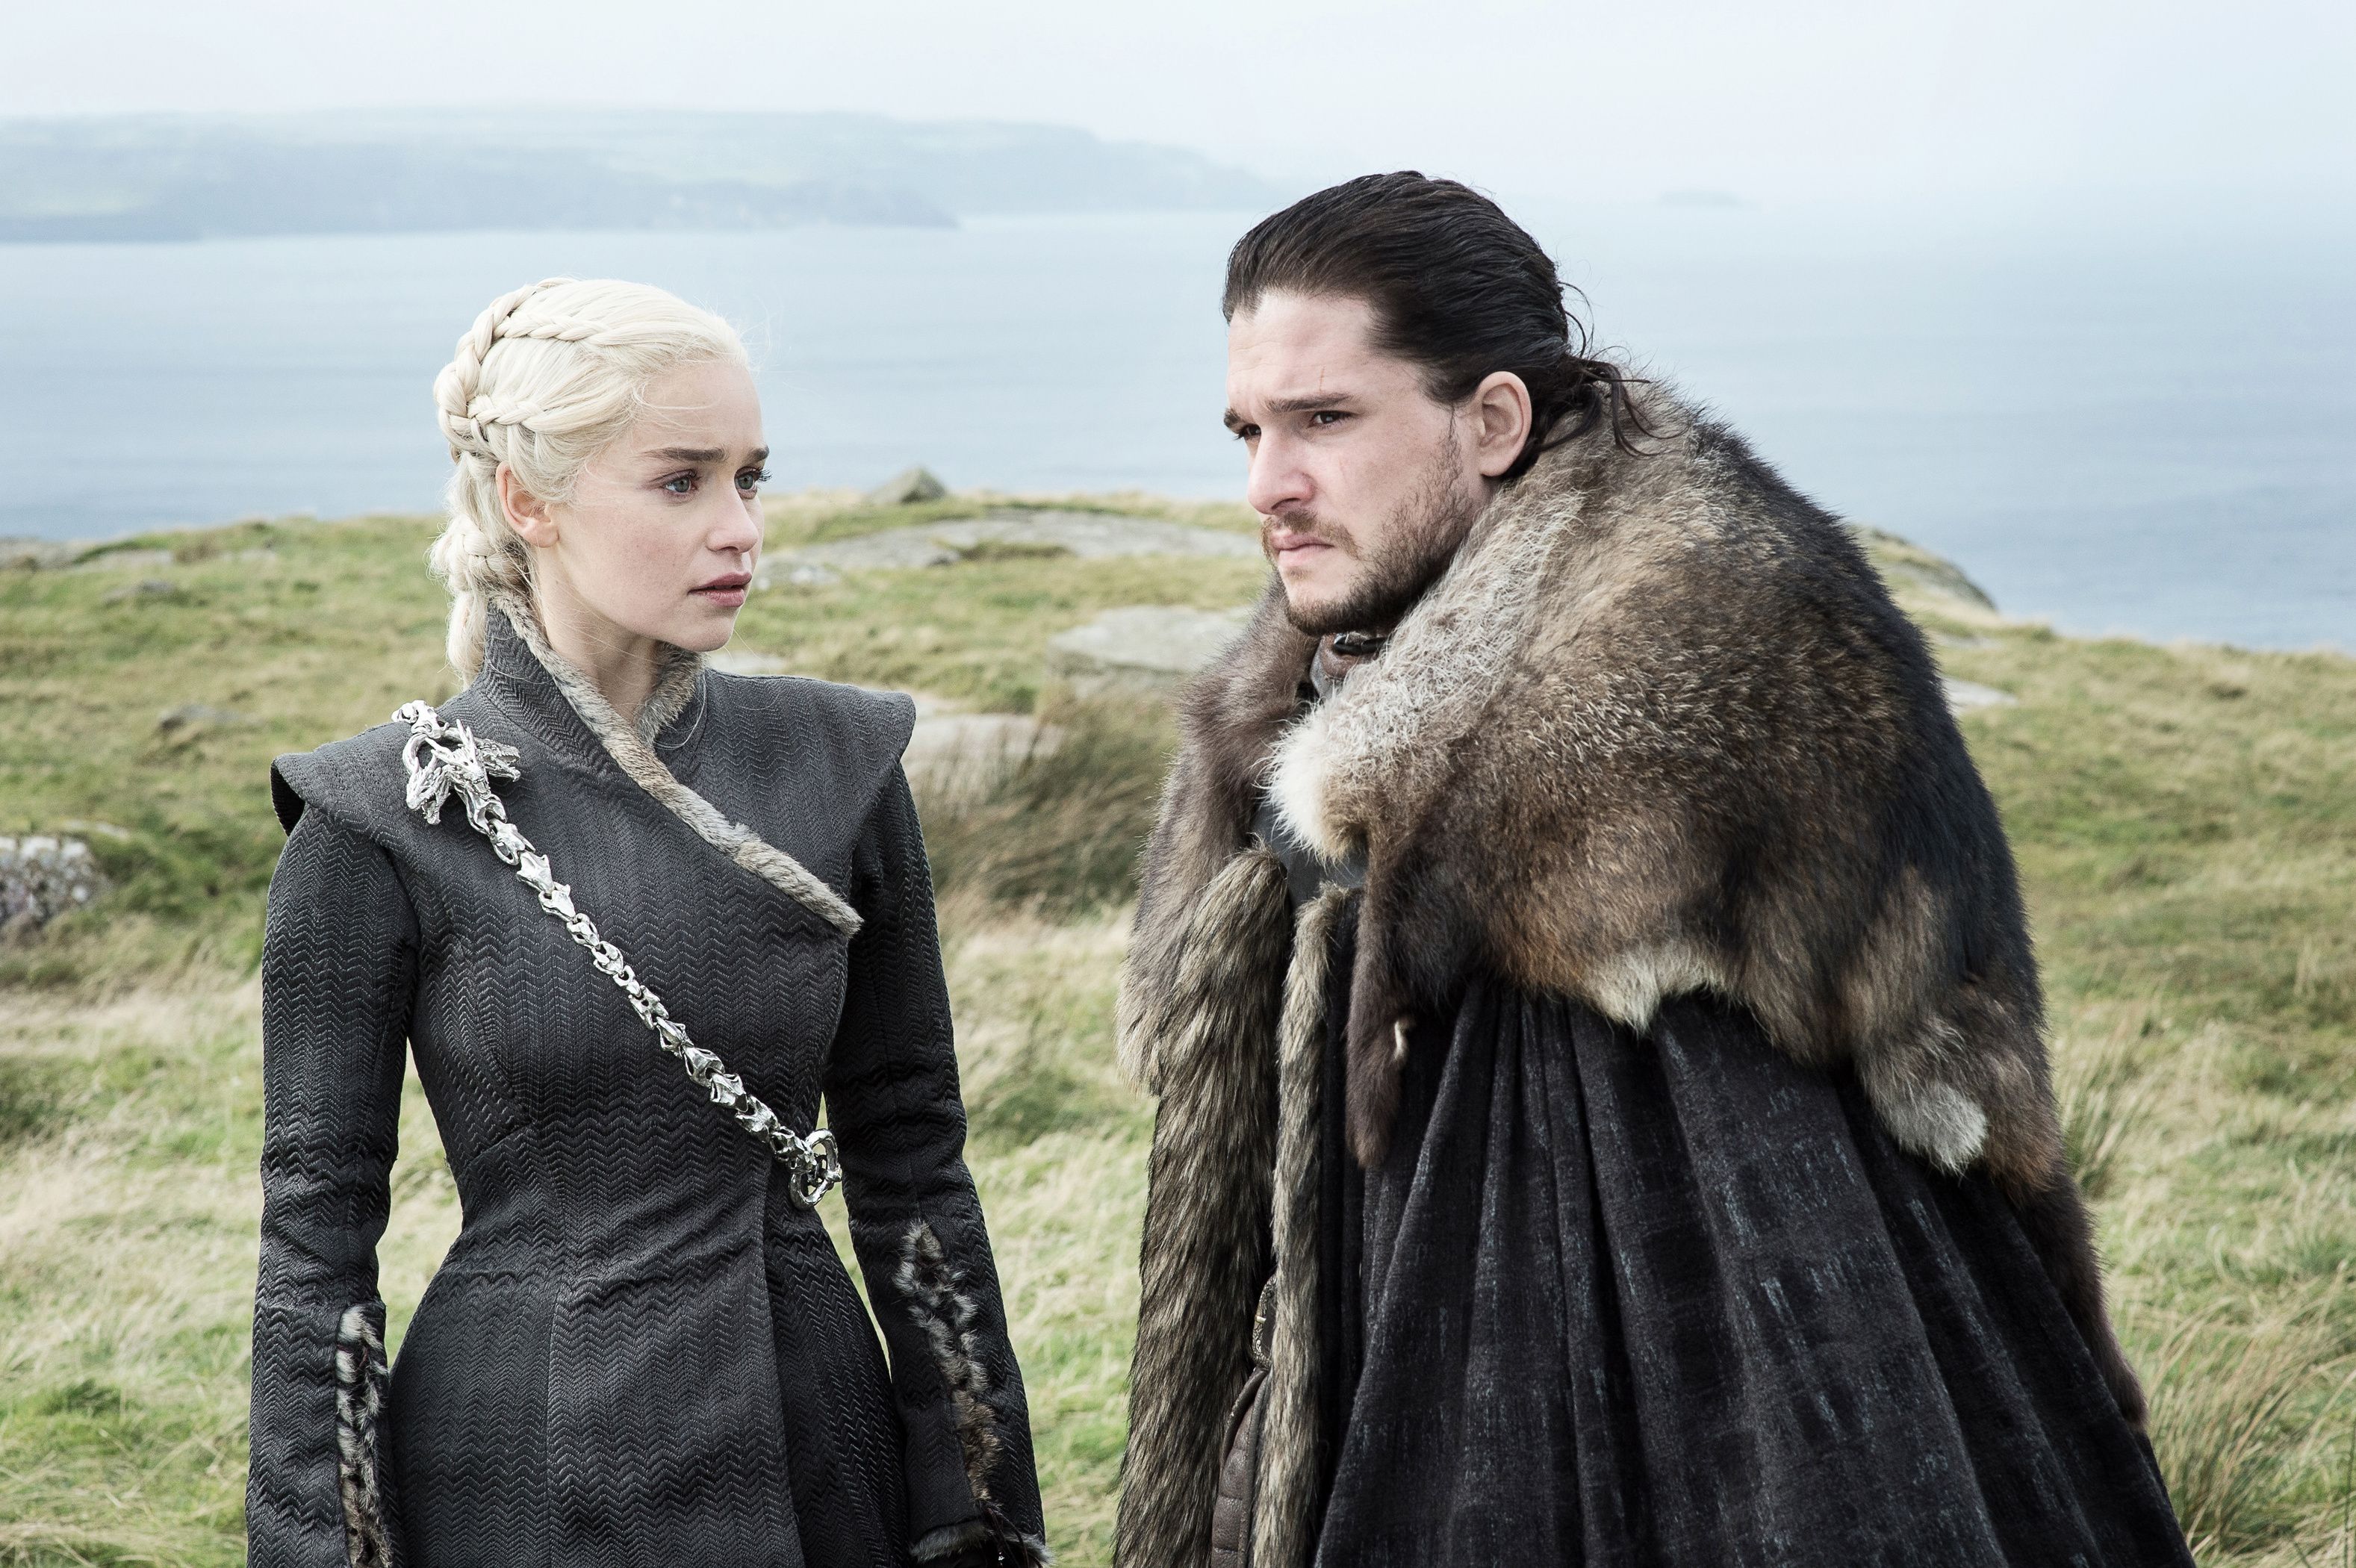 Game of Thrones' Wins Emmy Award for Outstanding Drama Series